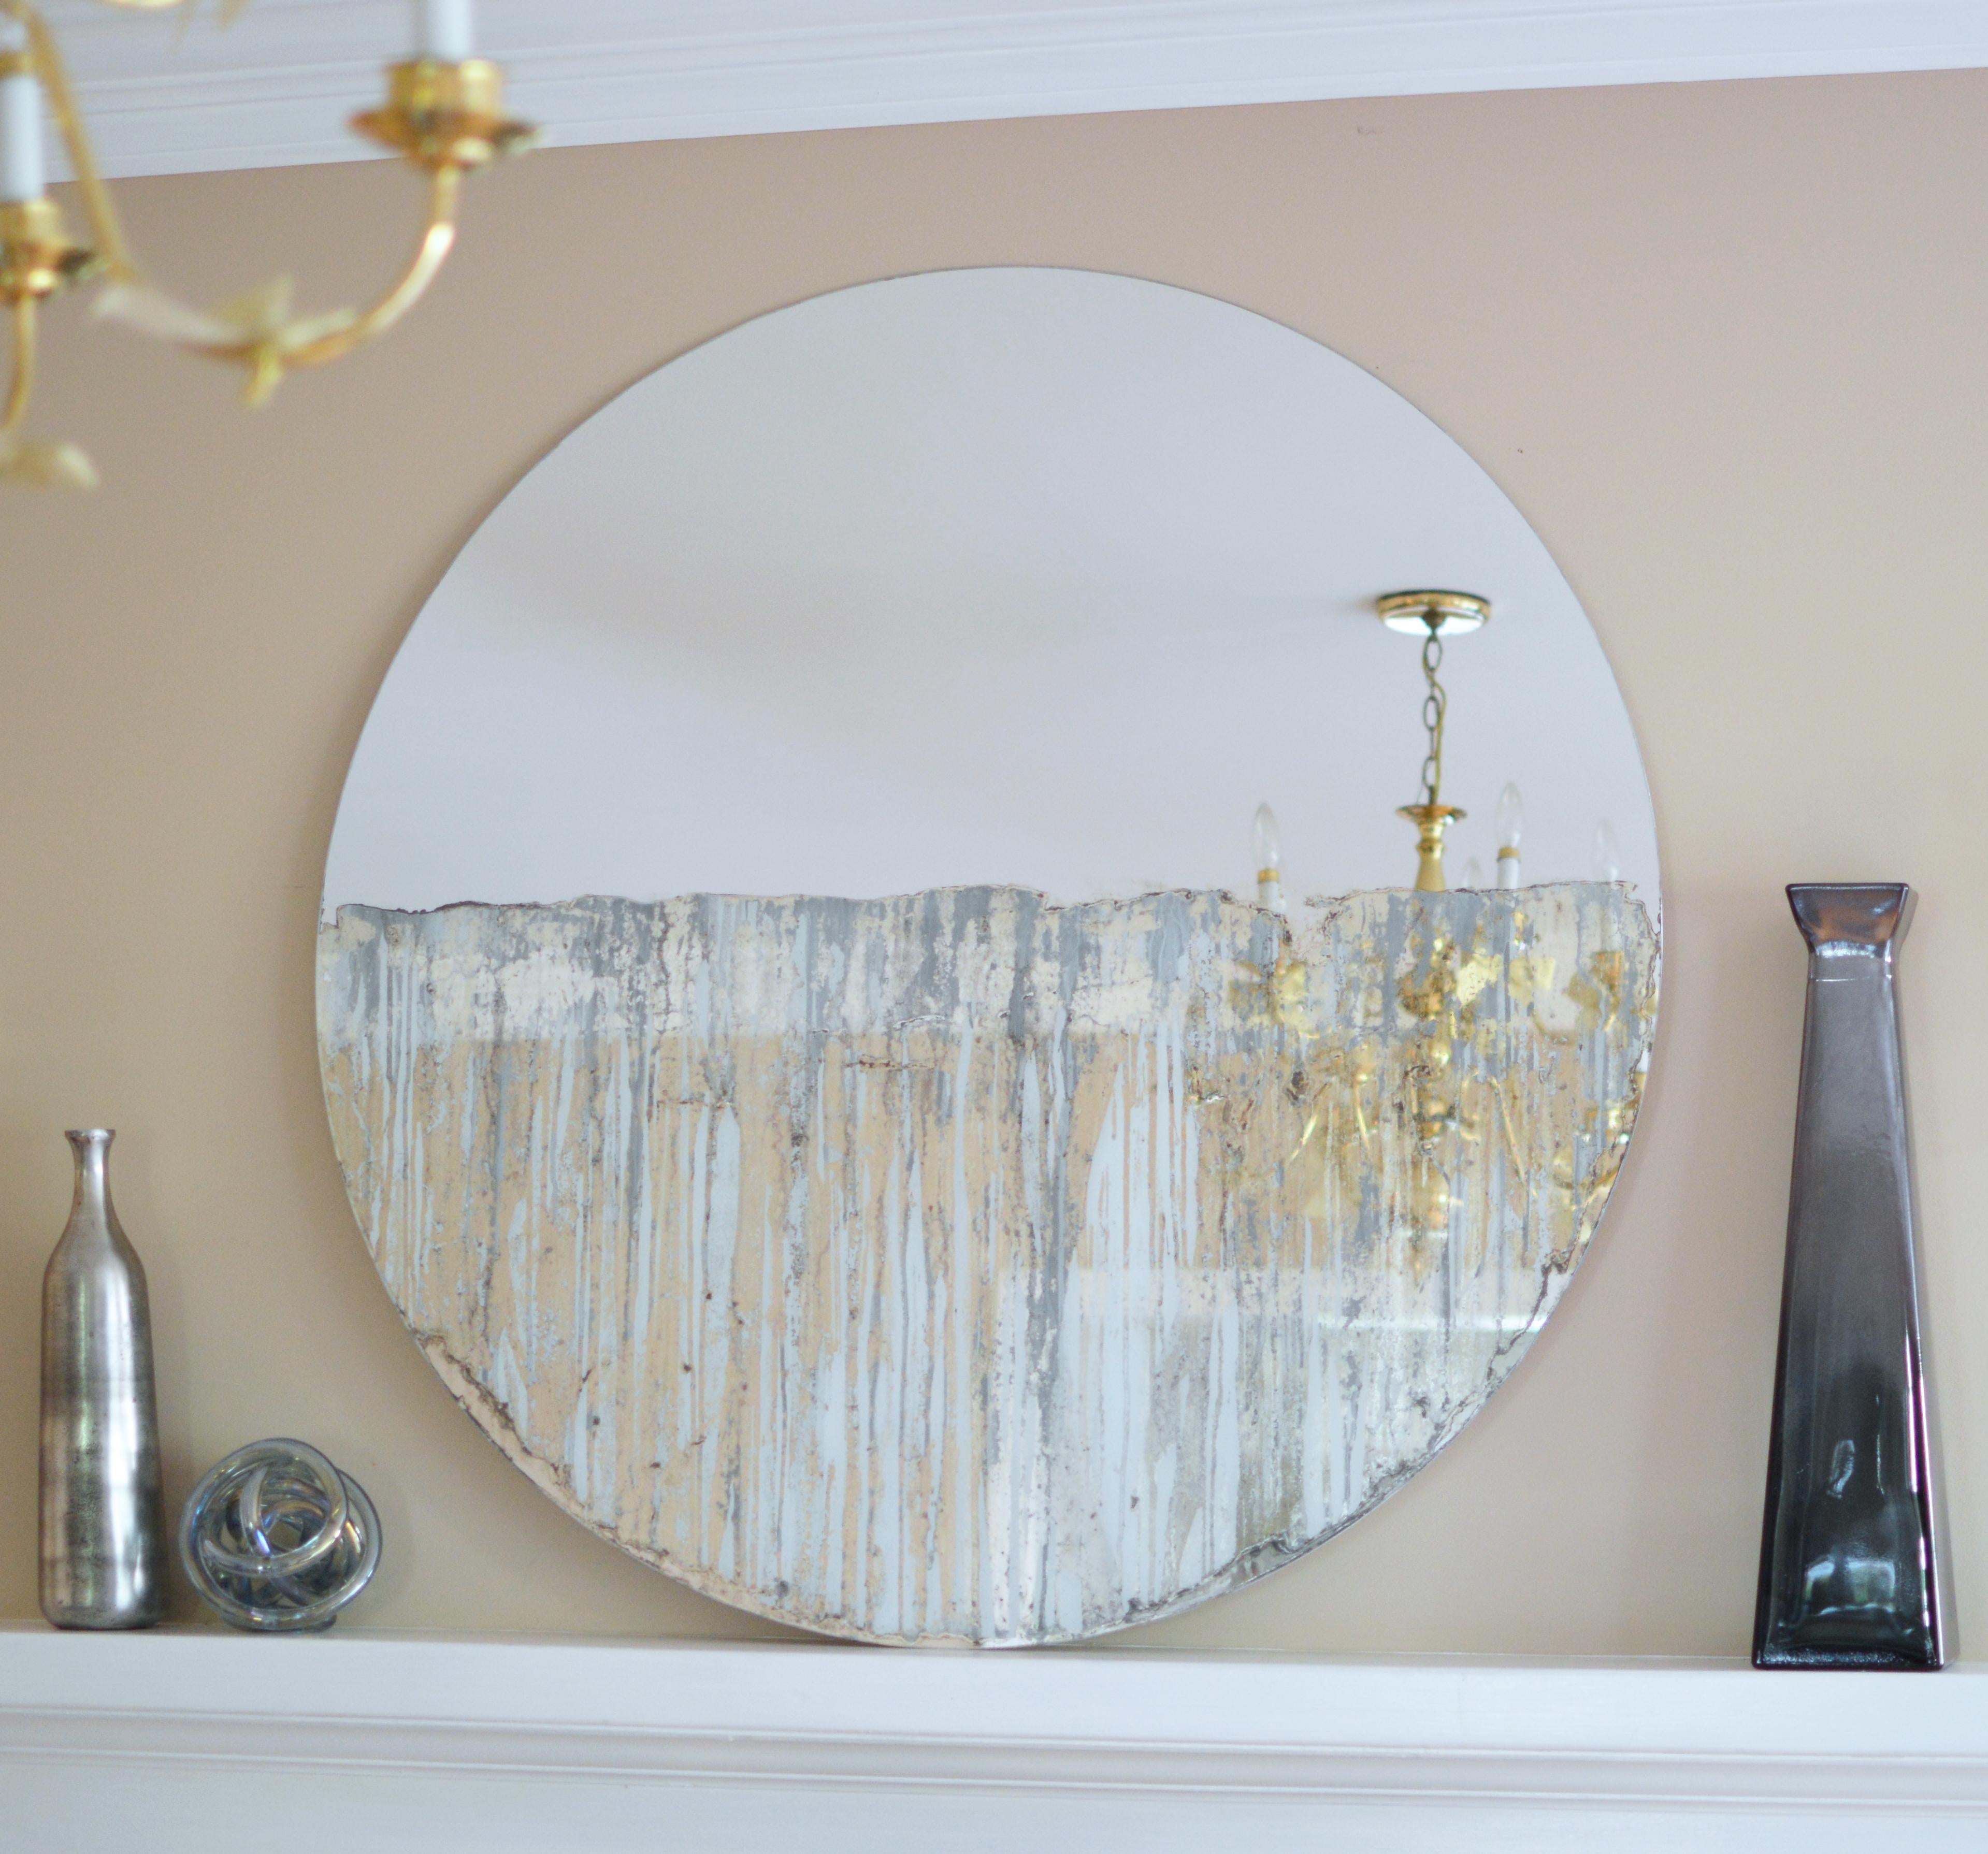 This contemporary mixed media piece is made with mixed media on a circular mirror. Deep blue-grey color has been applied over the bottom half of the mirror, giving it a painterly, dripped aesthetic but also allowing for mirror to continue to show